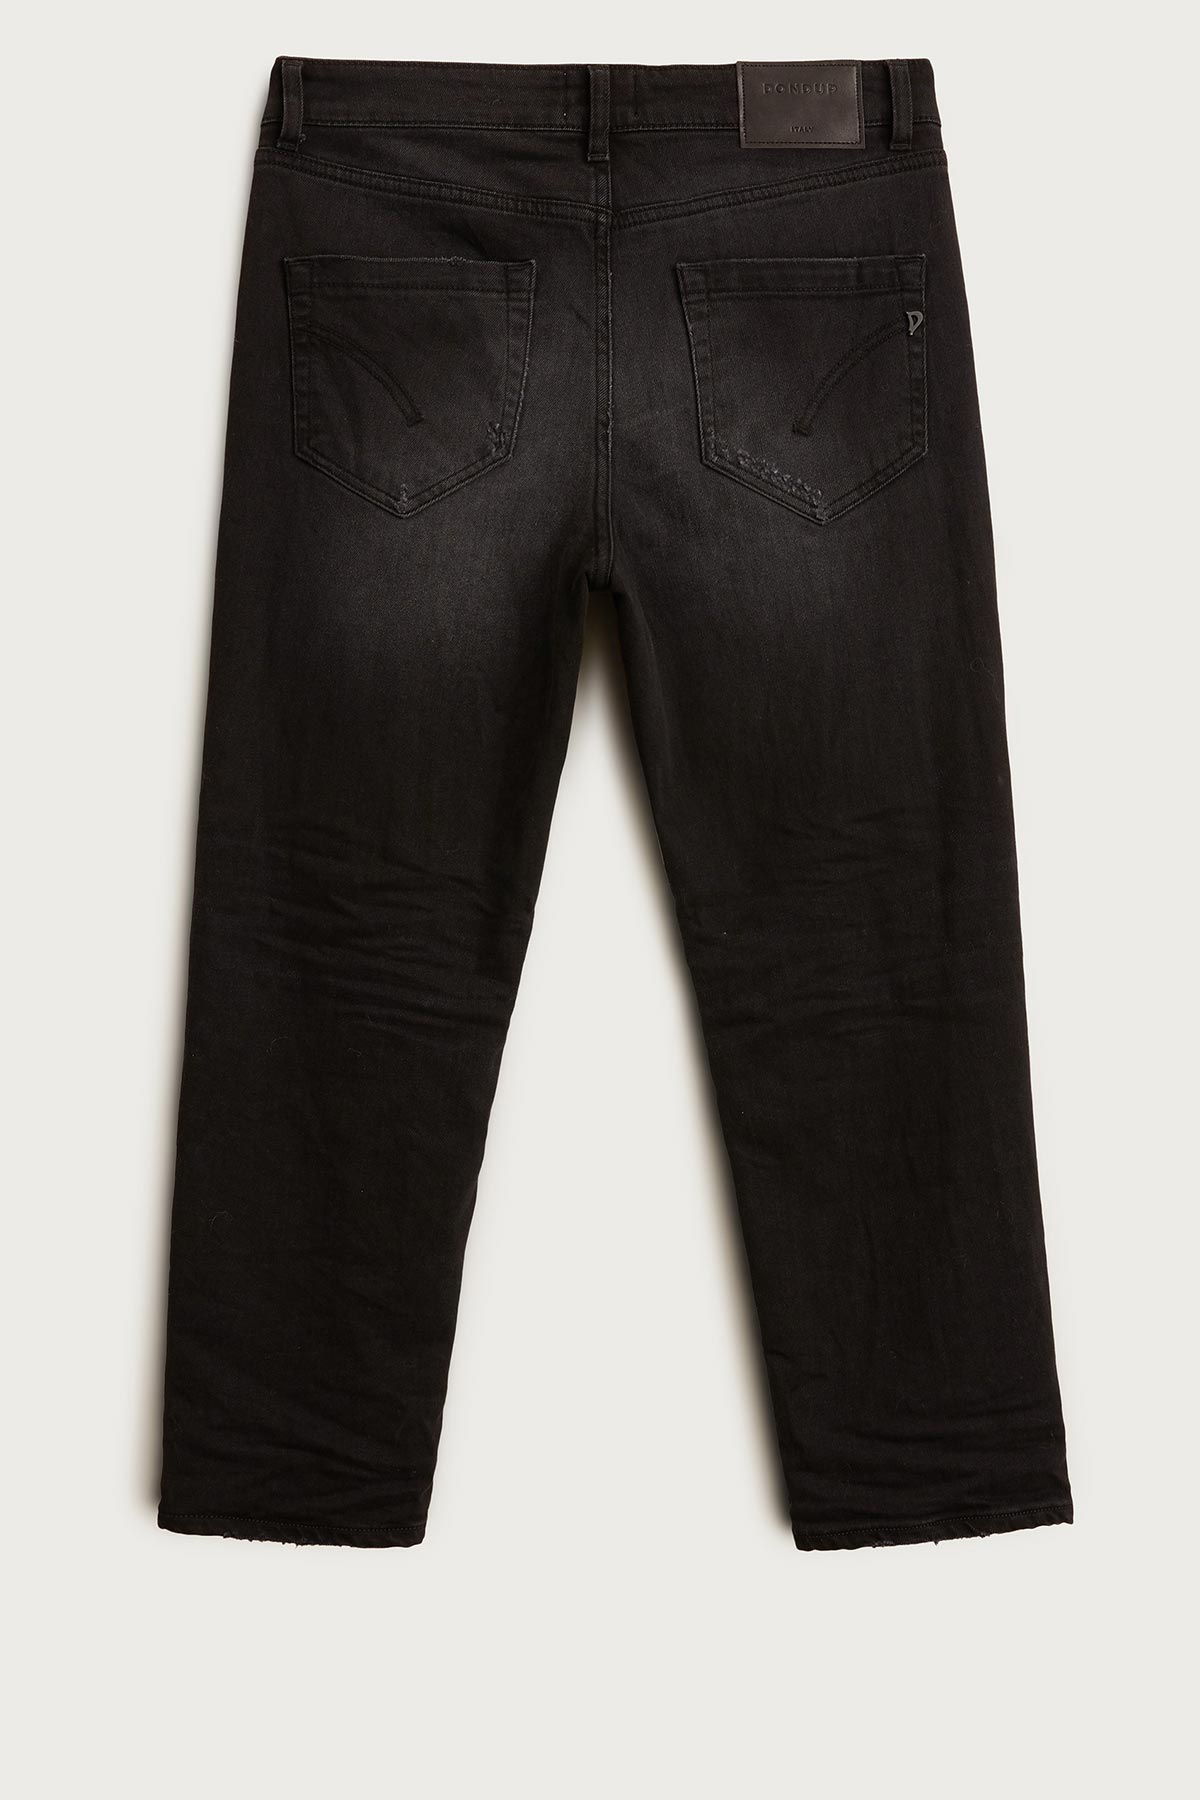 Dondup Koons Loose Fit Jeans-Libas Trendy Fashion Store